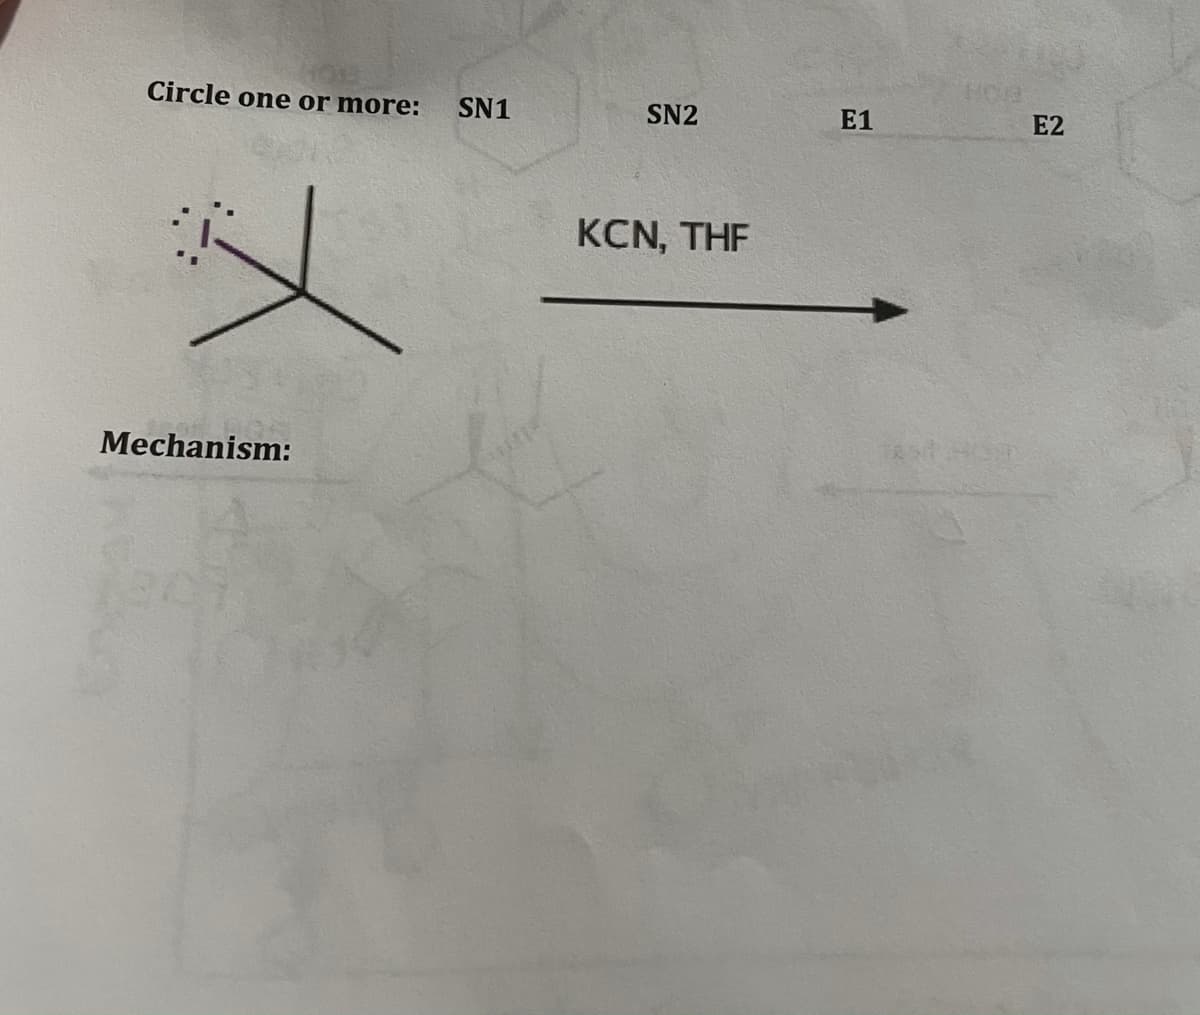 Circle one or more: SN1
SN2
E1
E2
KCN, THE
Mechanism:
